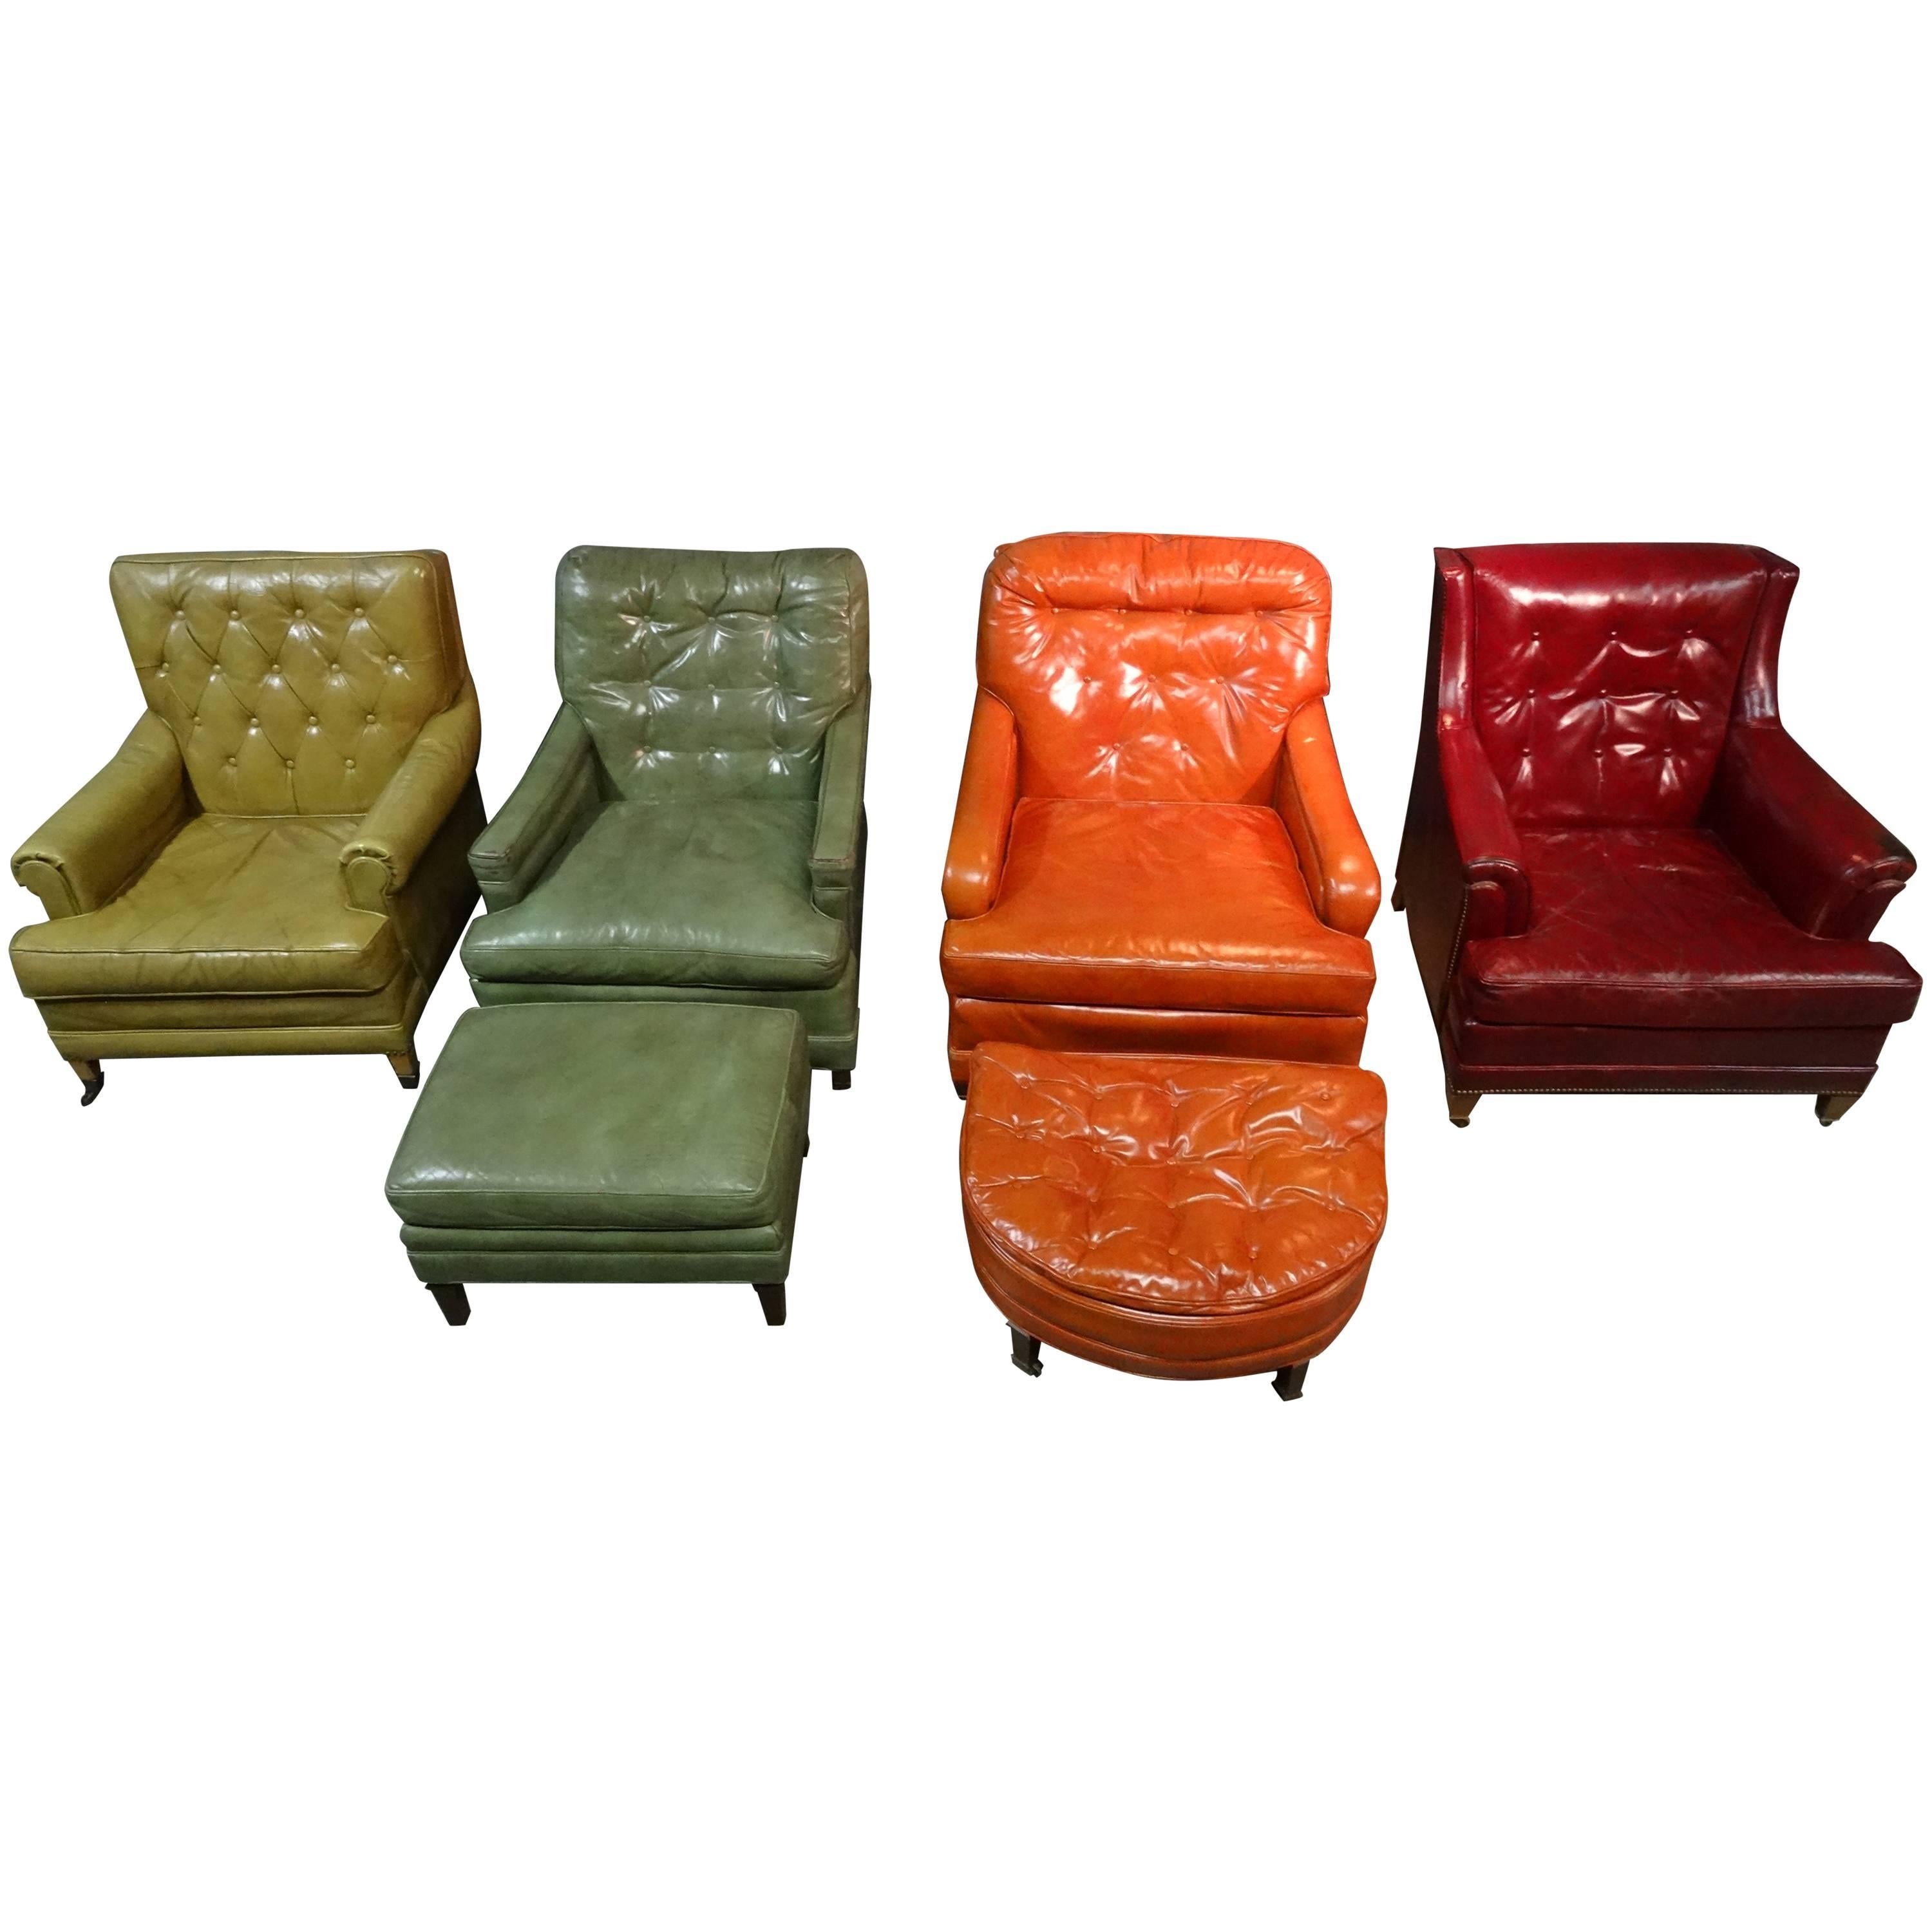 Collection of Vintage Leather Chairs For Sale